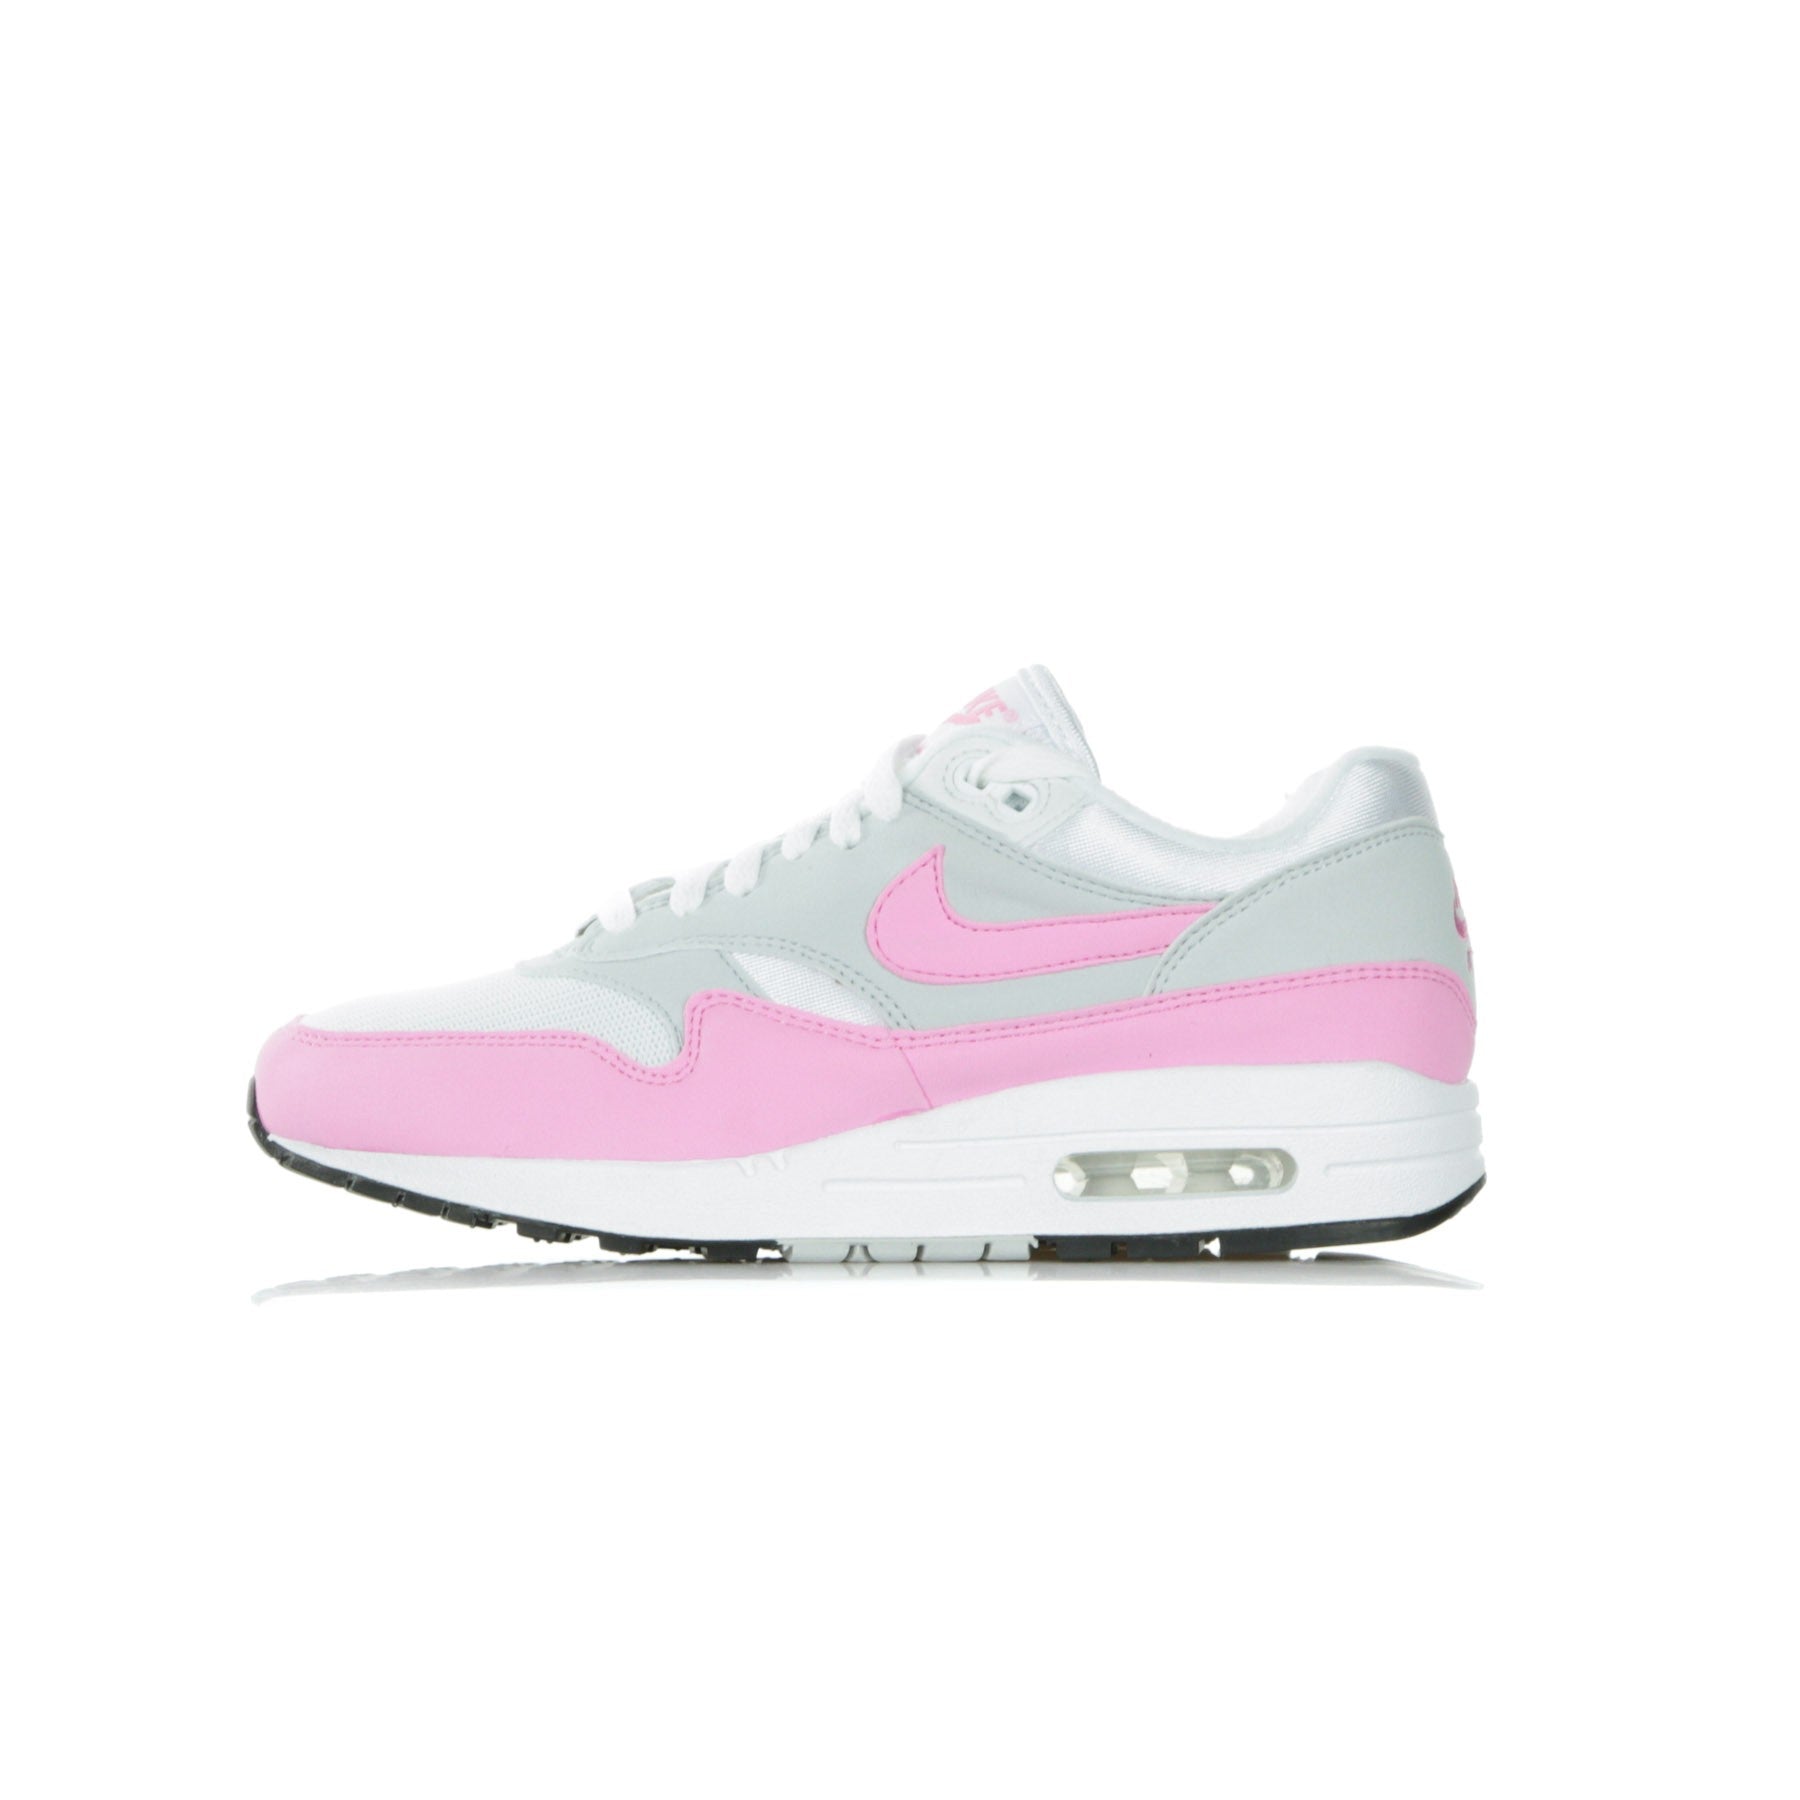 W Air Max 1 Ess White/psychic Pink Women's Low Shoe